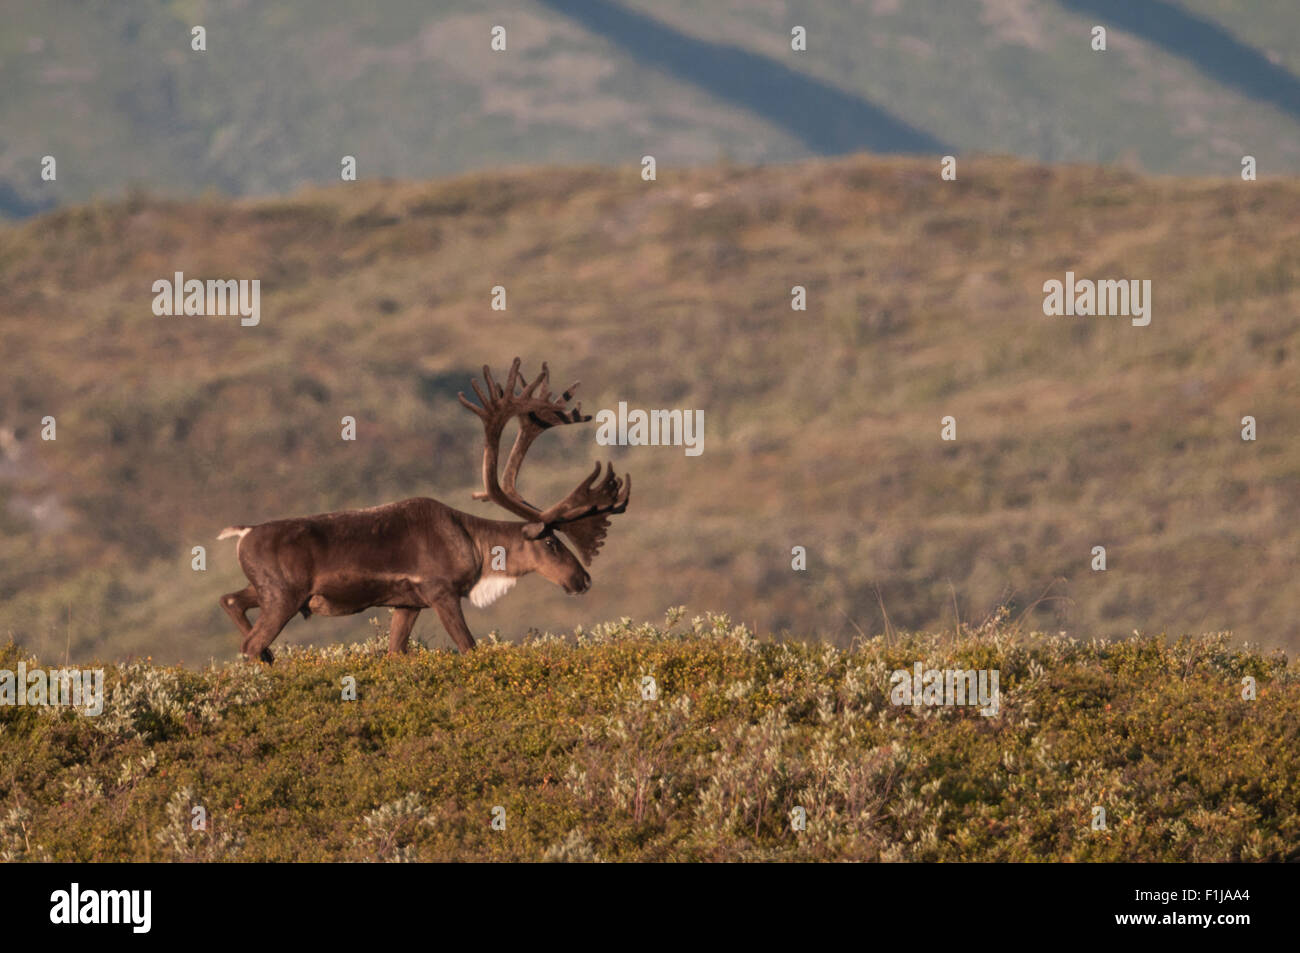 Bull Caribou (Rangifer tarandus) with antlers in the velvet that nourishes their growth until it is shed prior to the fall rut. Stock Photo